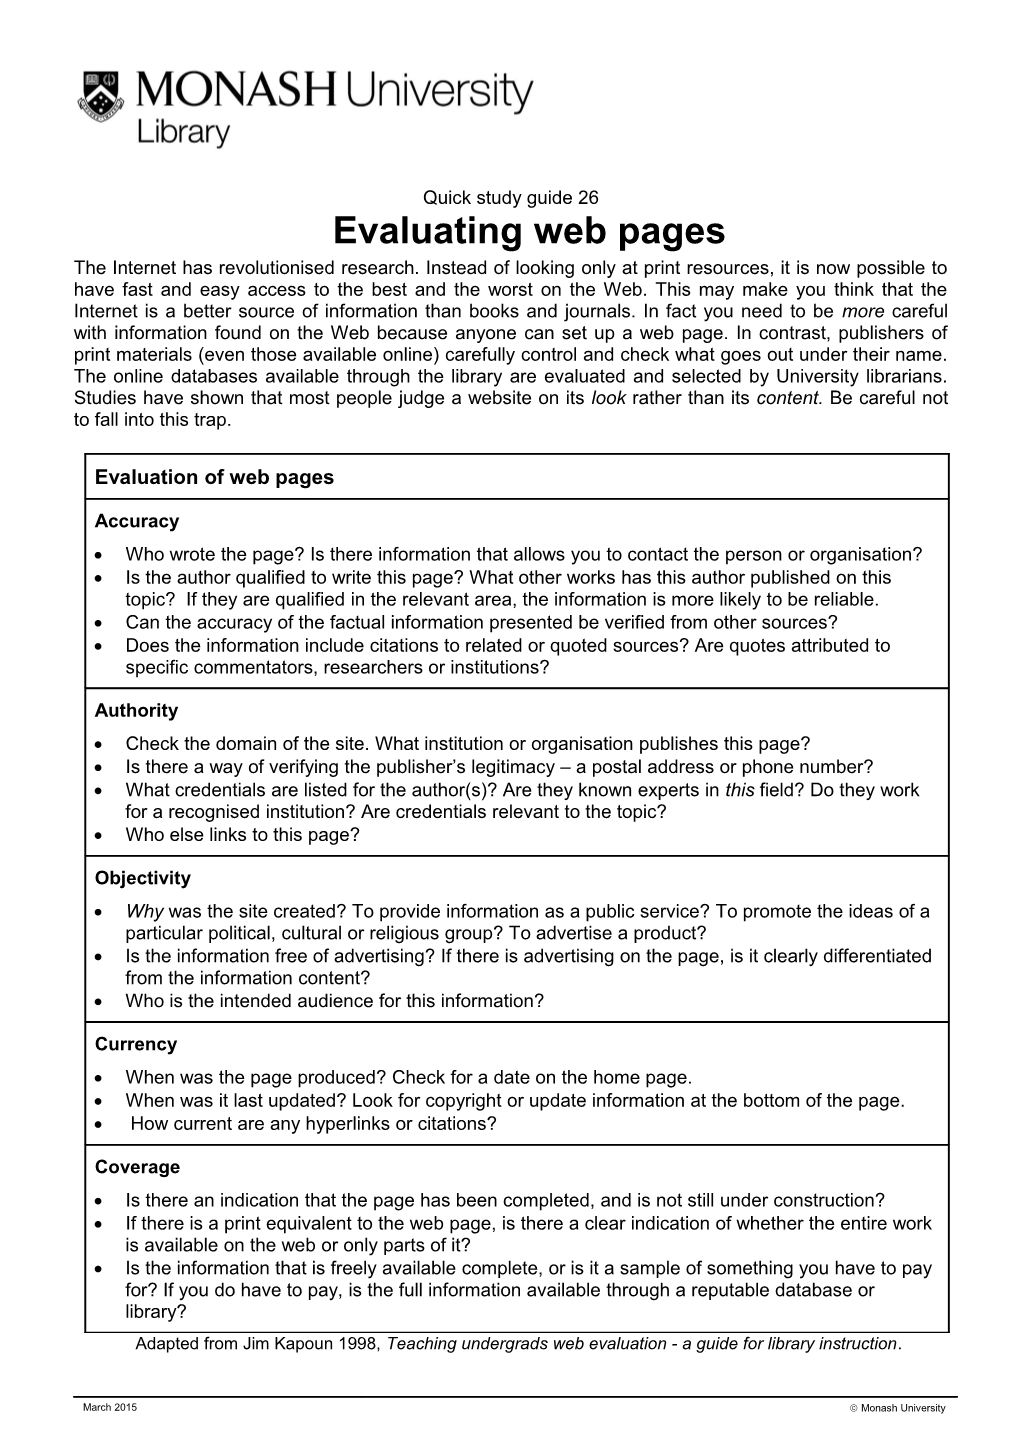 Evaluating Web Pages